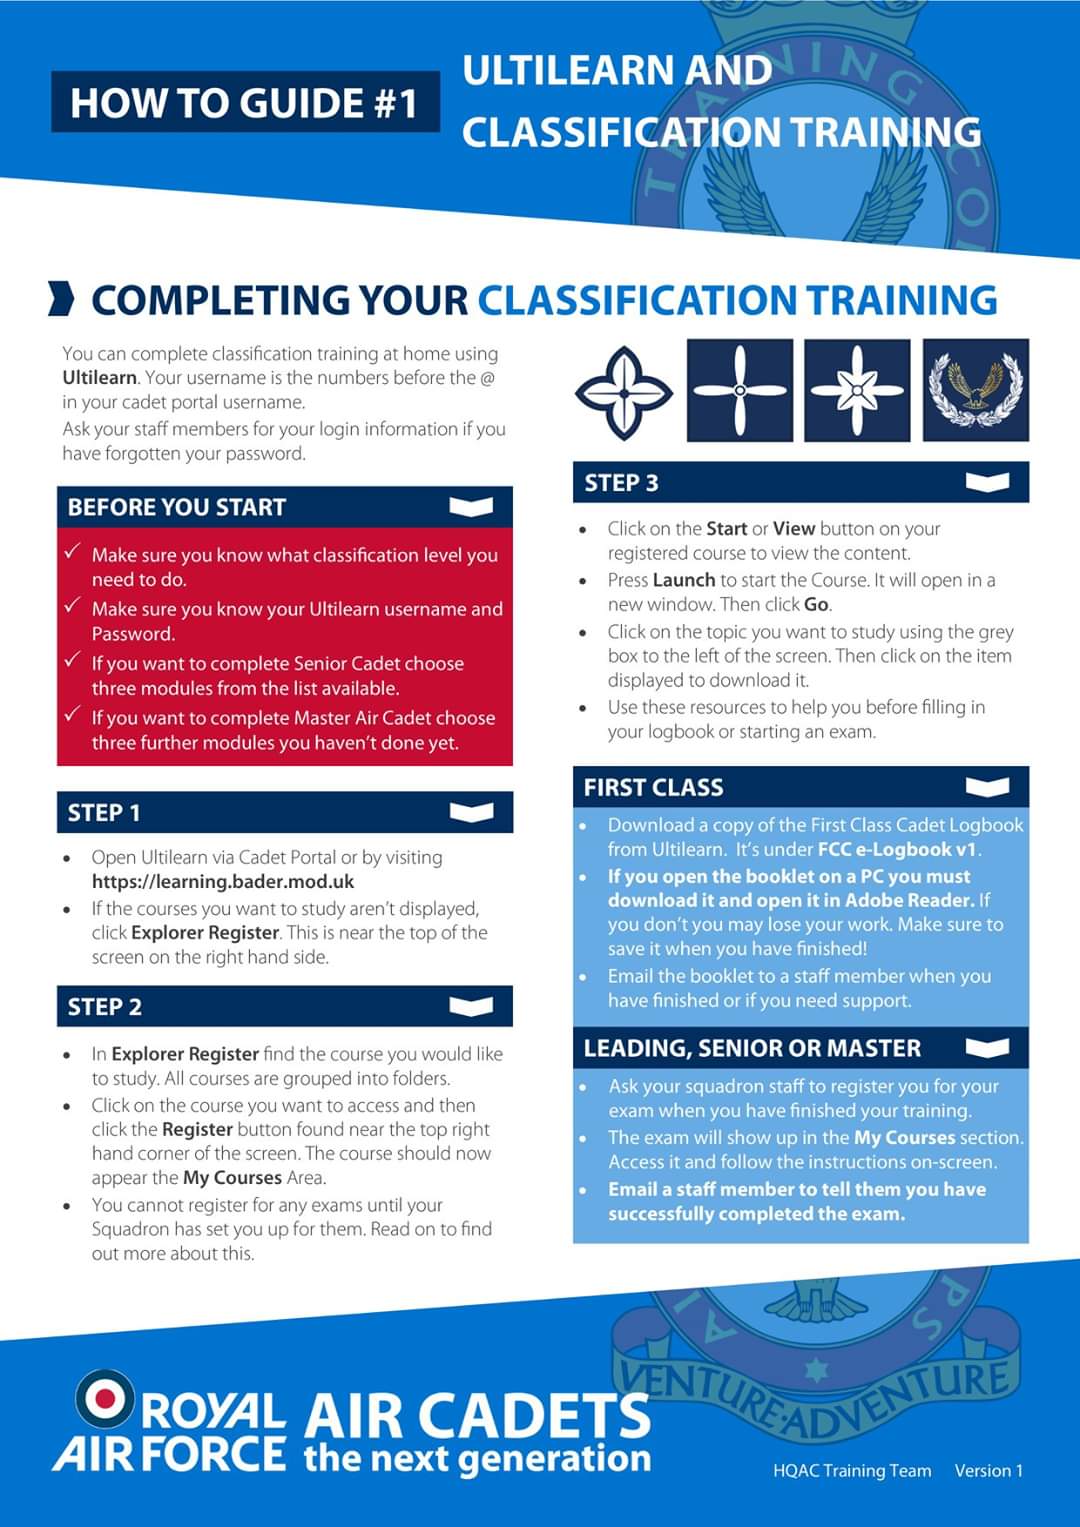 What to Know Before Your First Class: The Fundamentals of